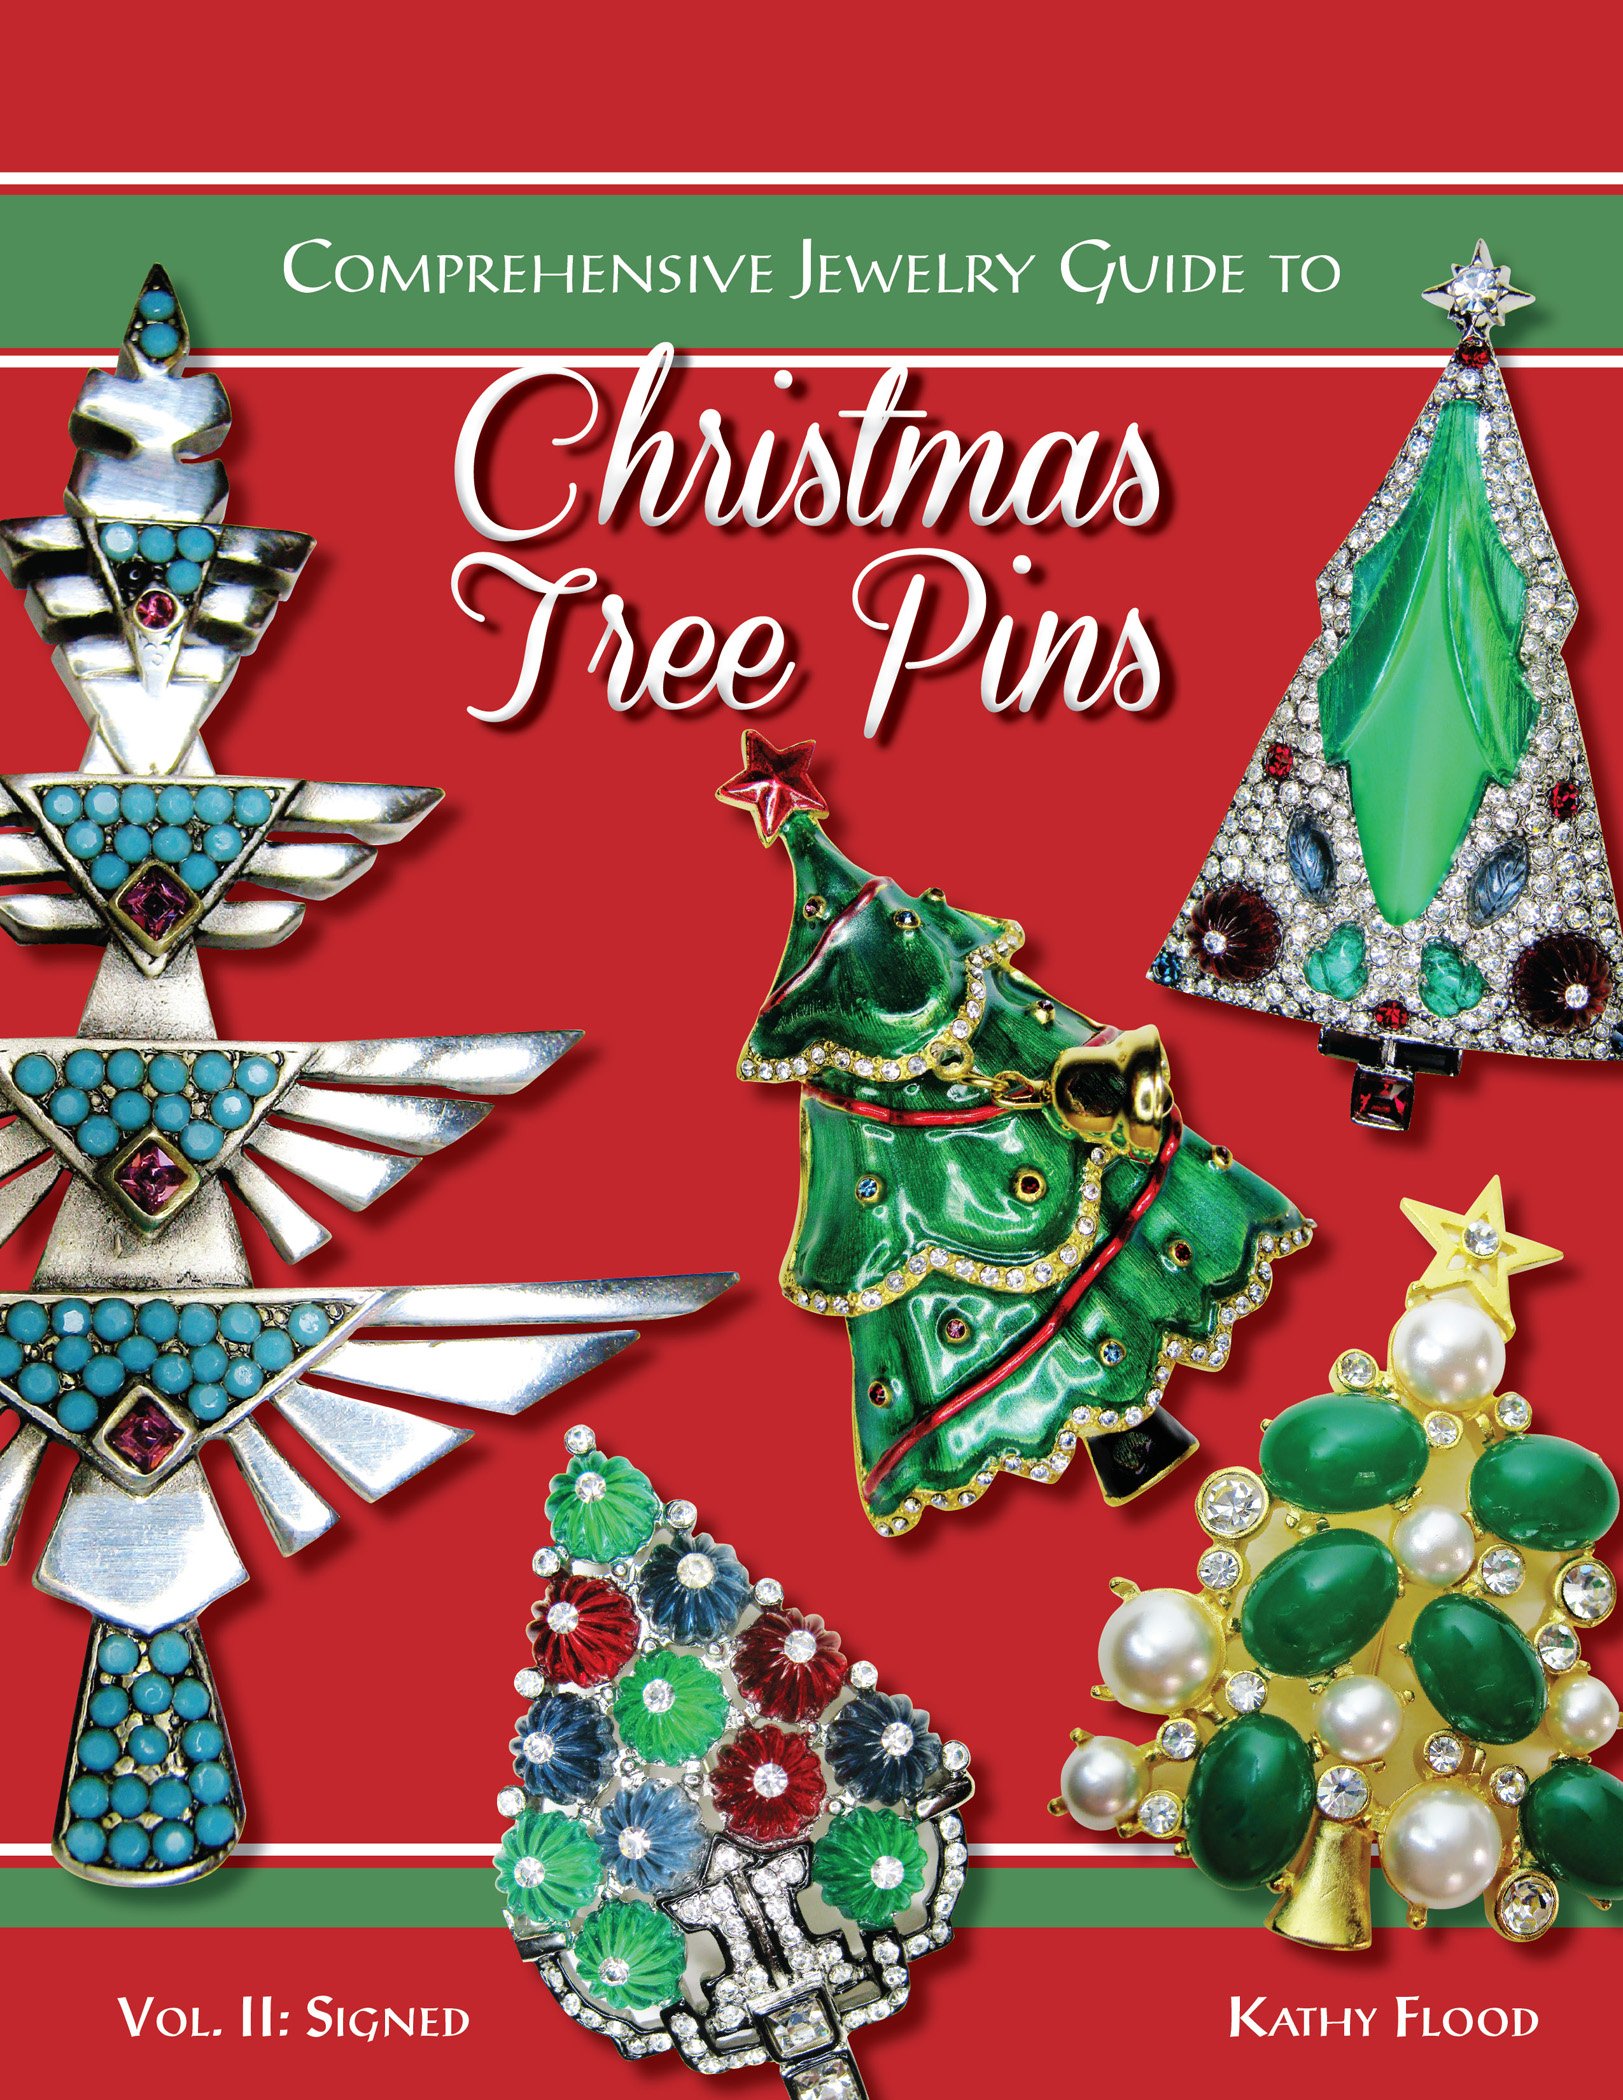 Comprehensive Jewelry Guide to Christmas Tree Pins